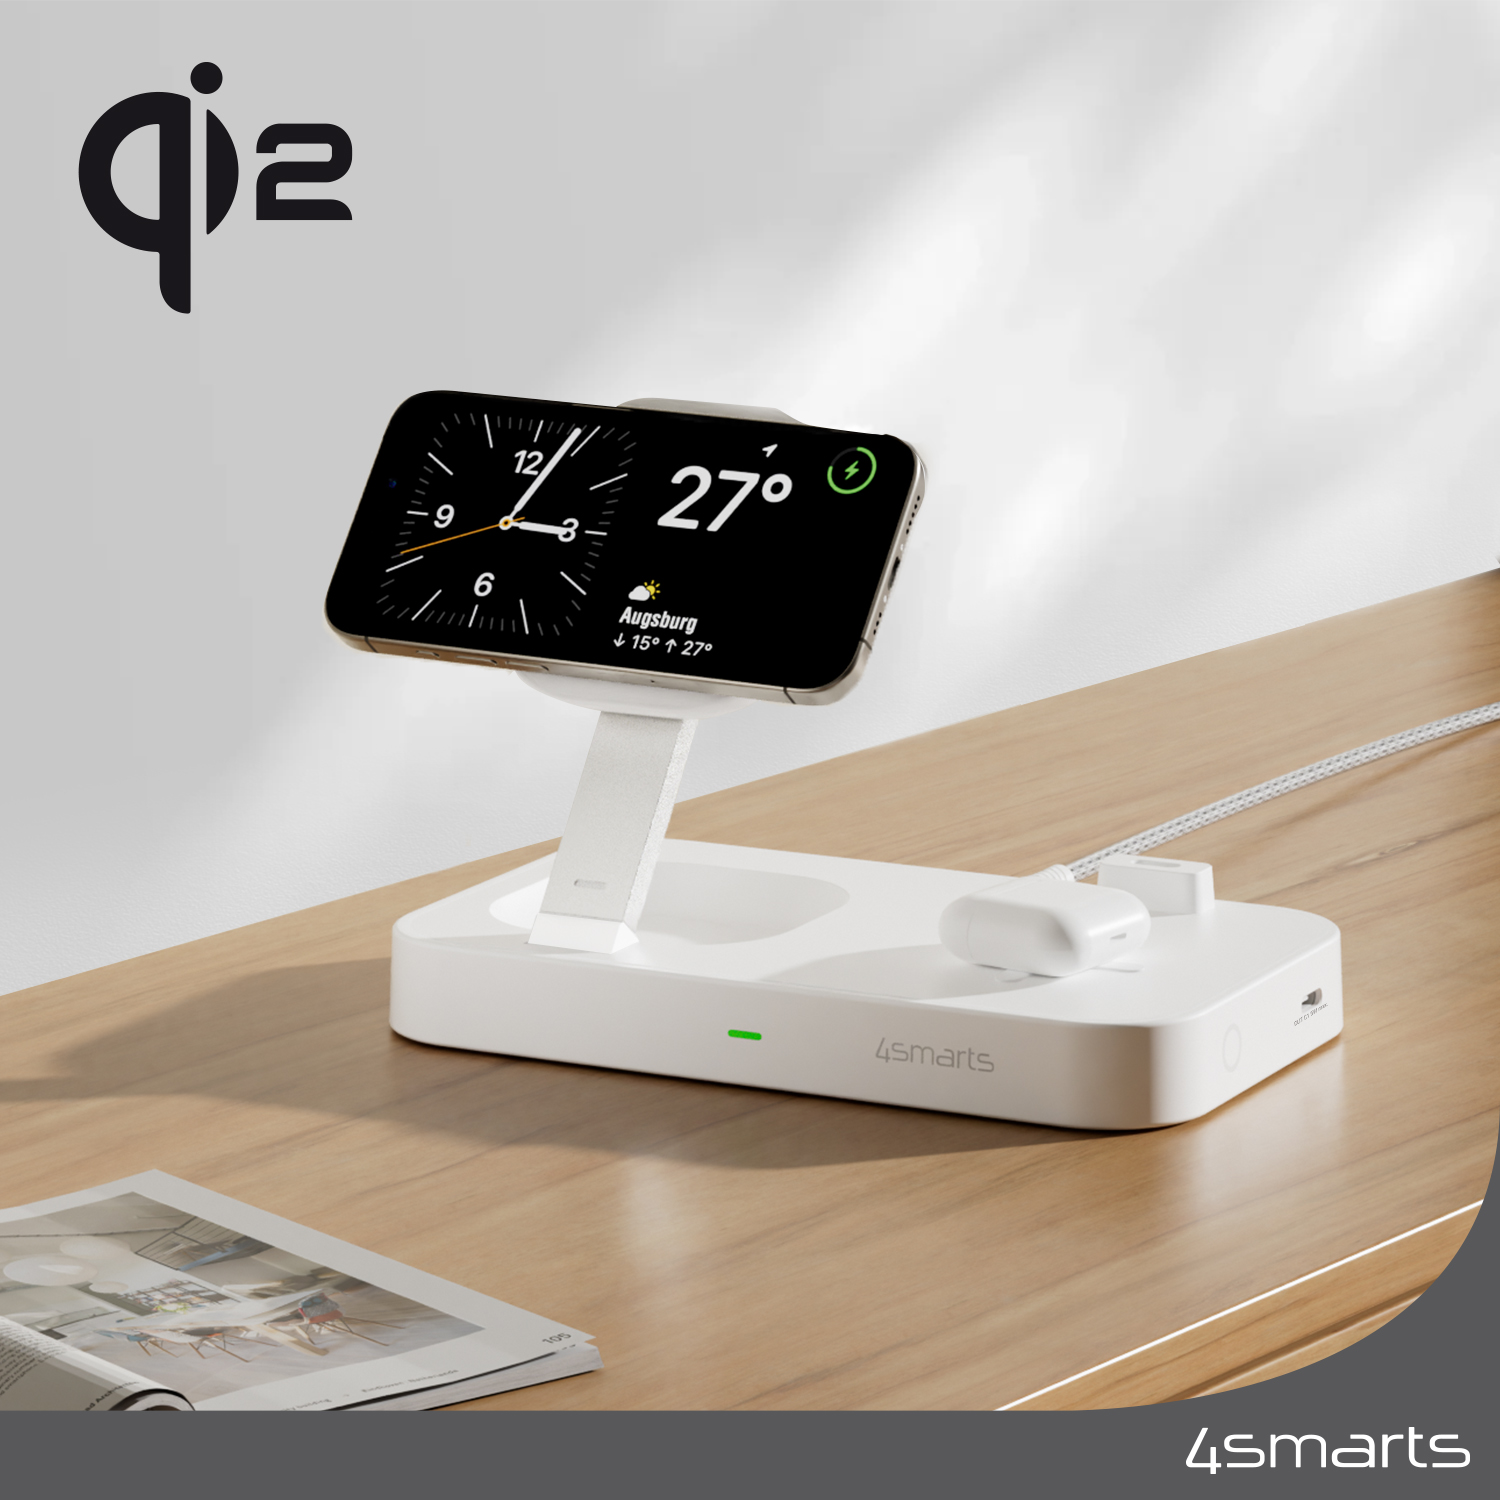 The 3-in-1 4smarts Qi2 Trident Charging Station looks good anywhere - in the office, kitchen or living room.